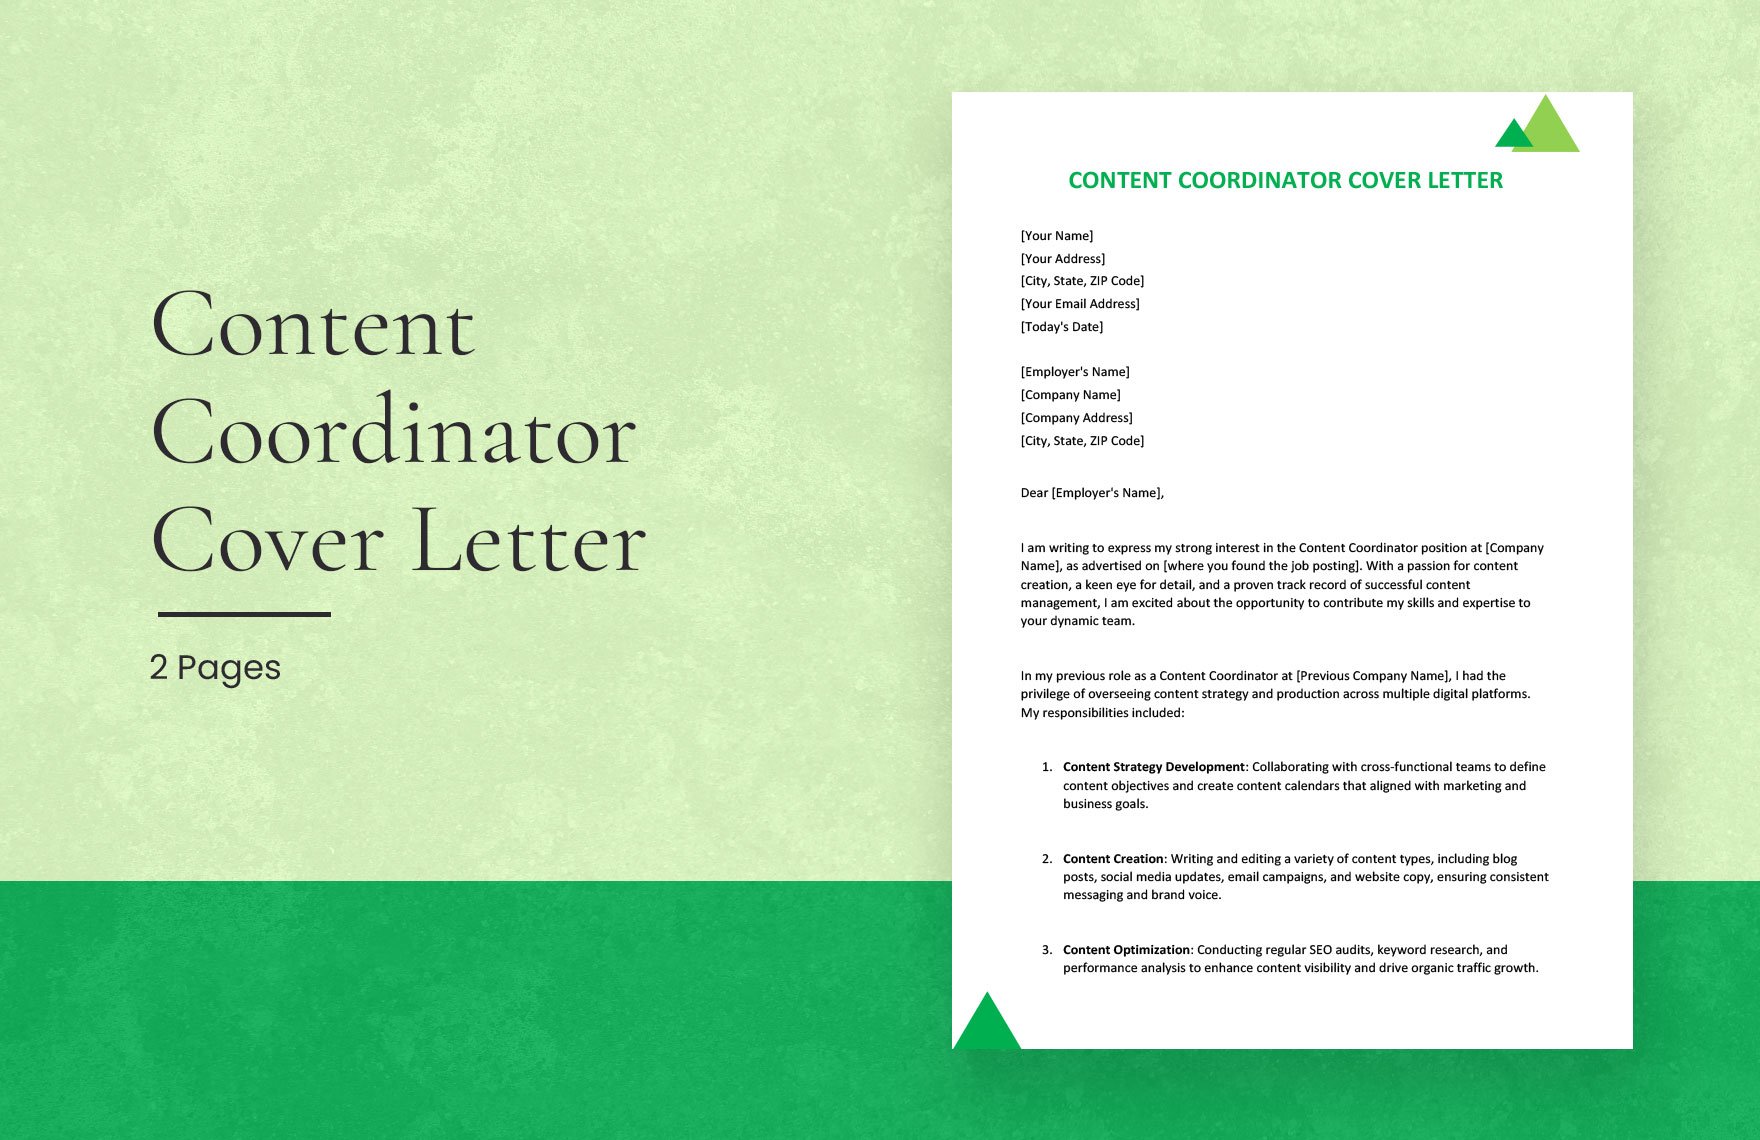 Content Coordinator Cover Letter in Word, Google Docs